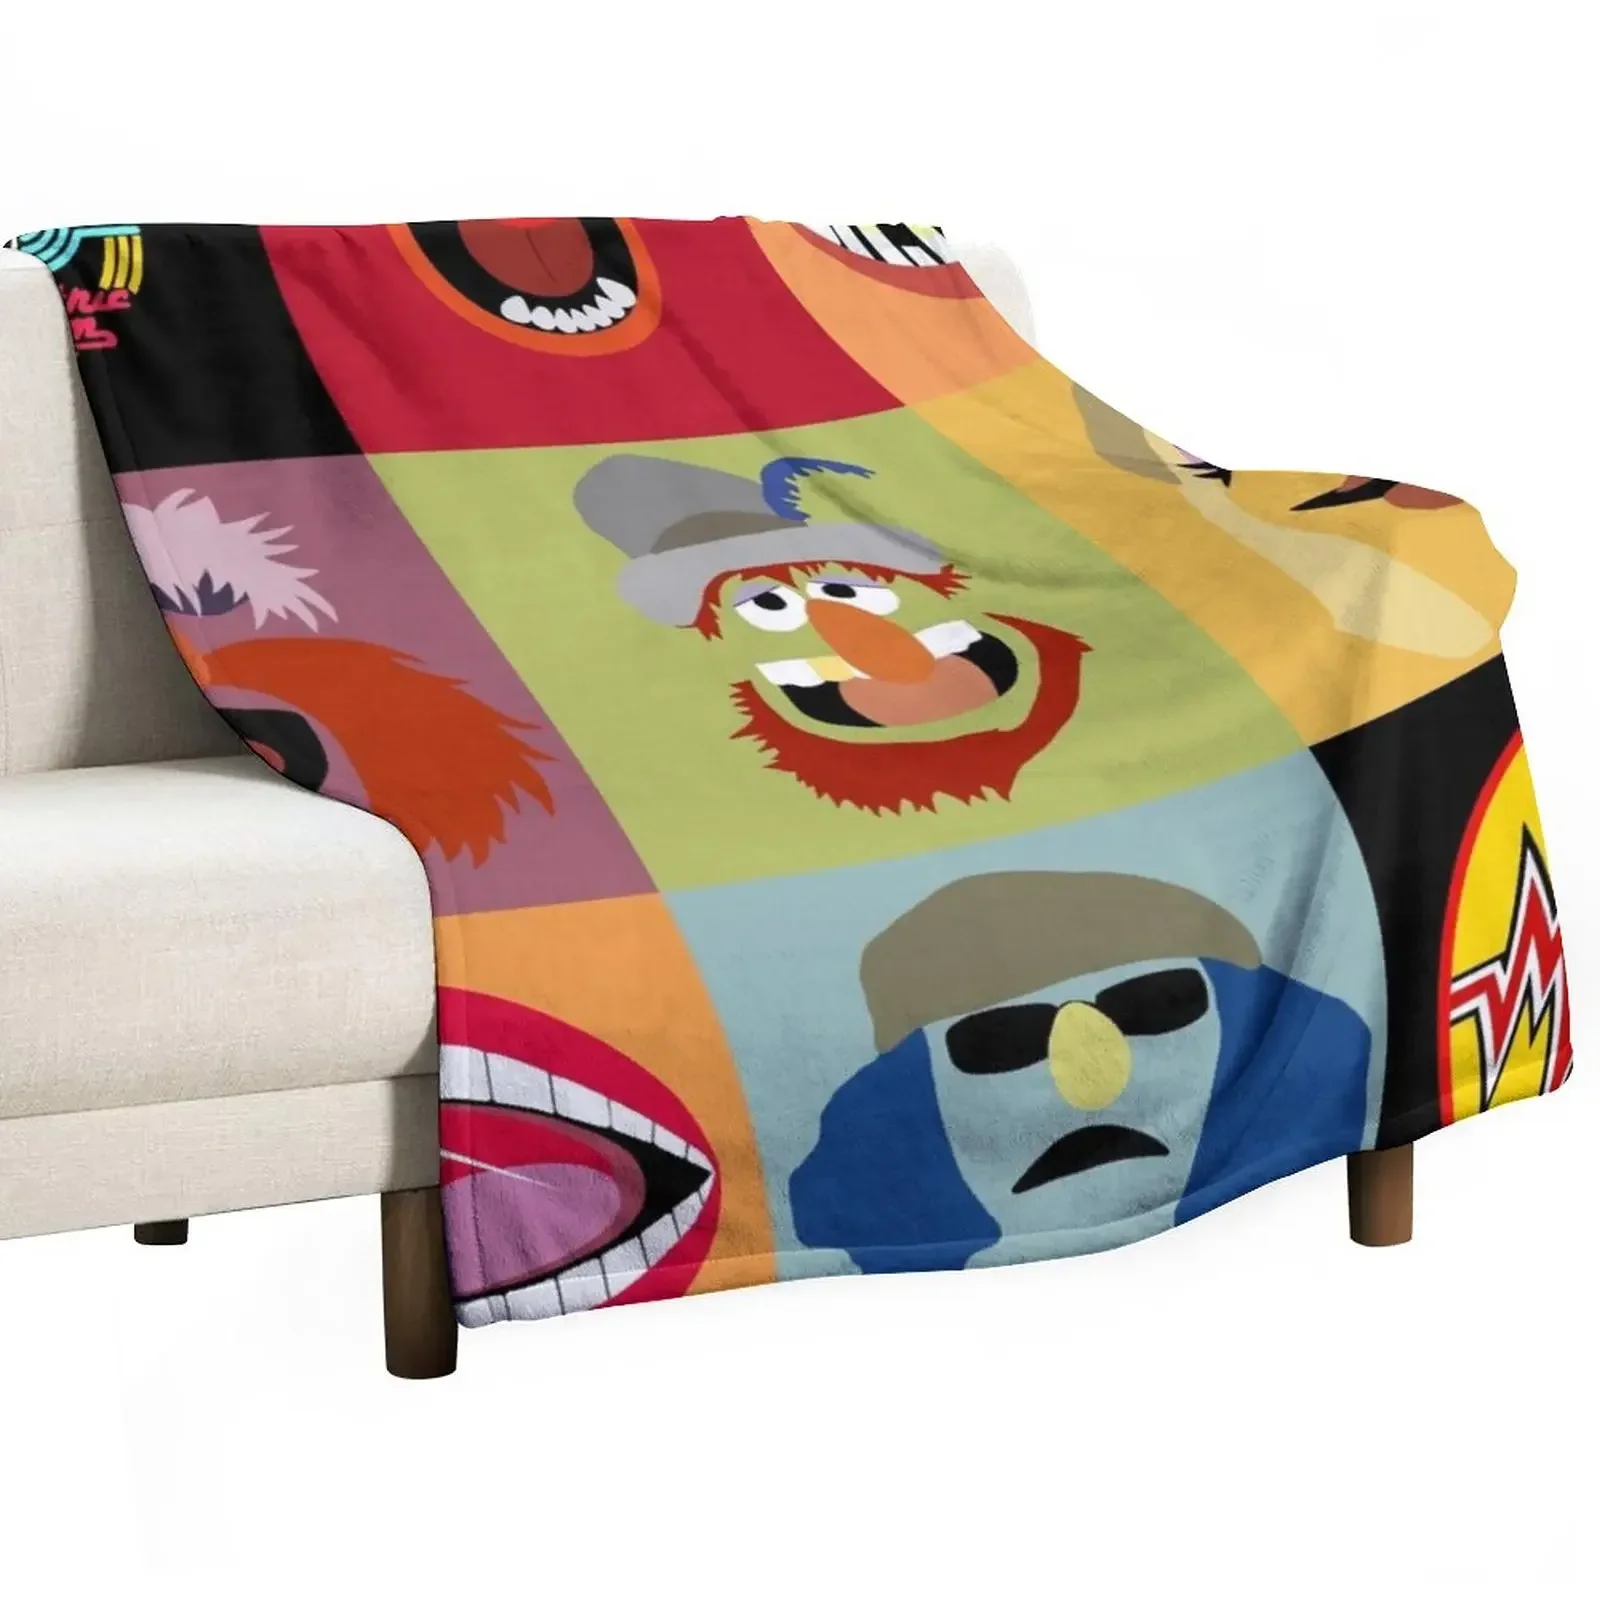 

Dr. Teeth and the Electric Mayhem Throw Blanket Flannel Fabric Designers Blankets